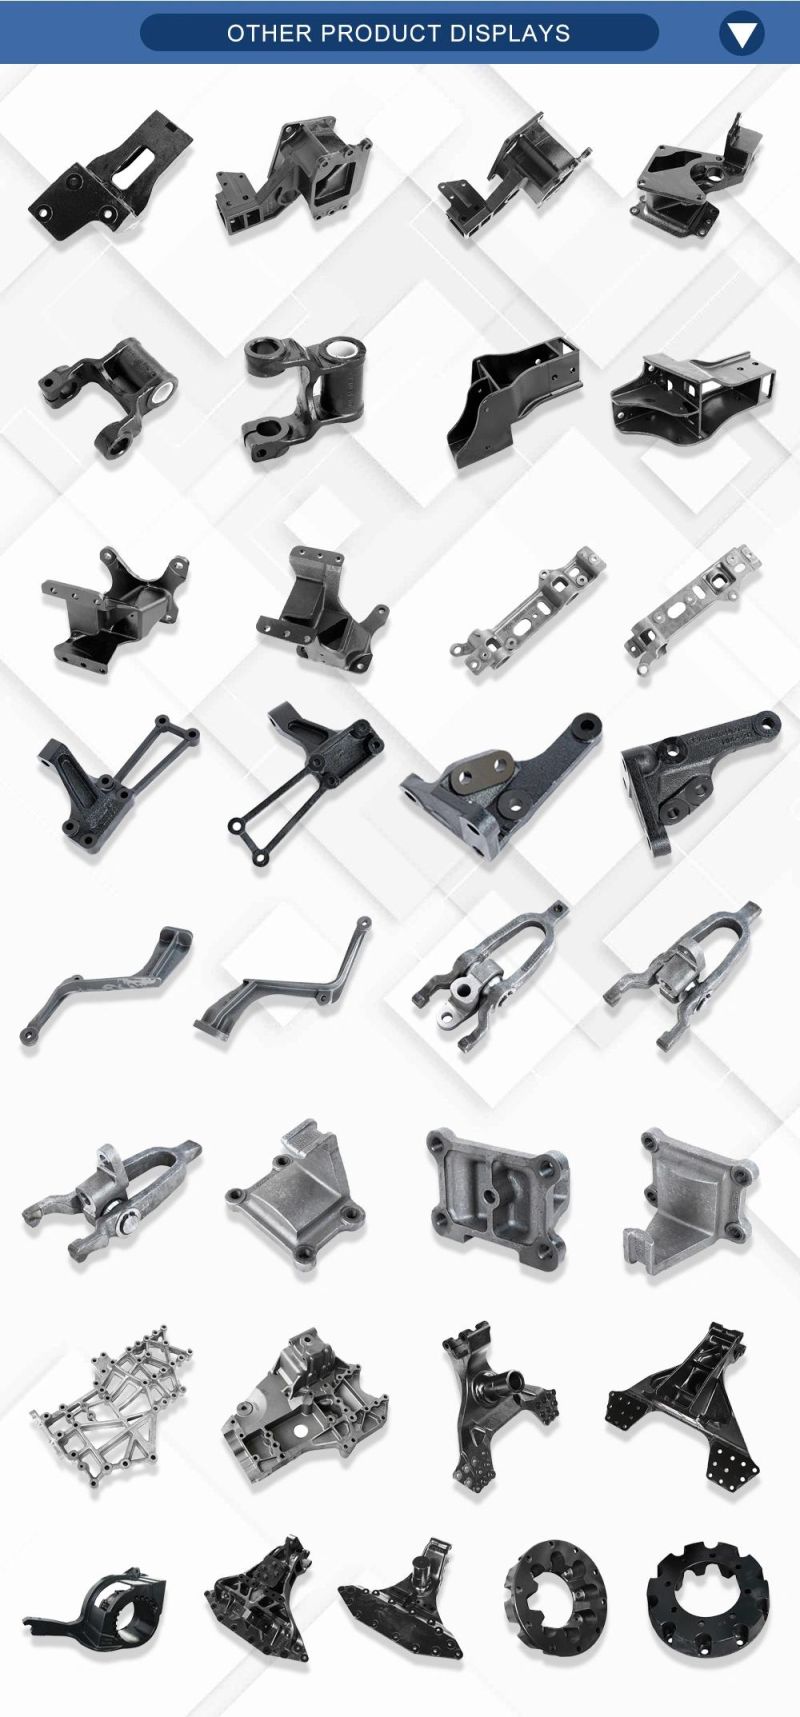 OEM Iron Casting Precision Auto Parts Lost Wax Investment Casting